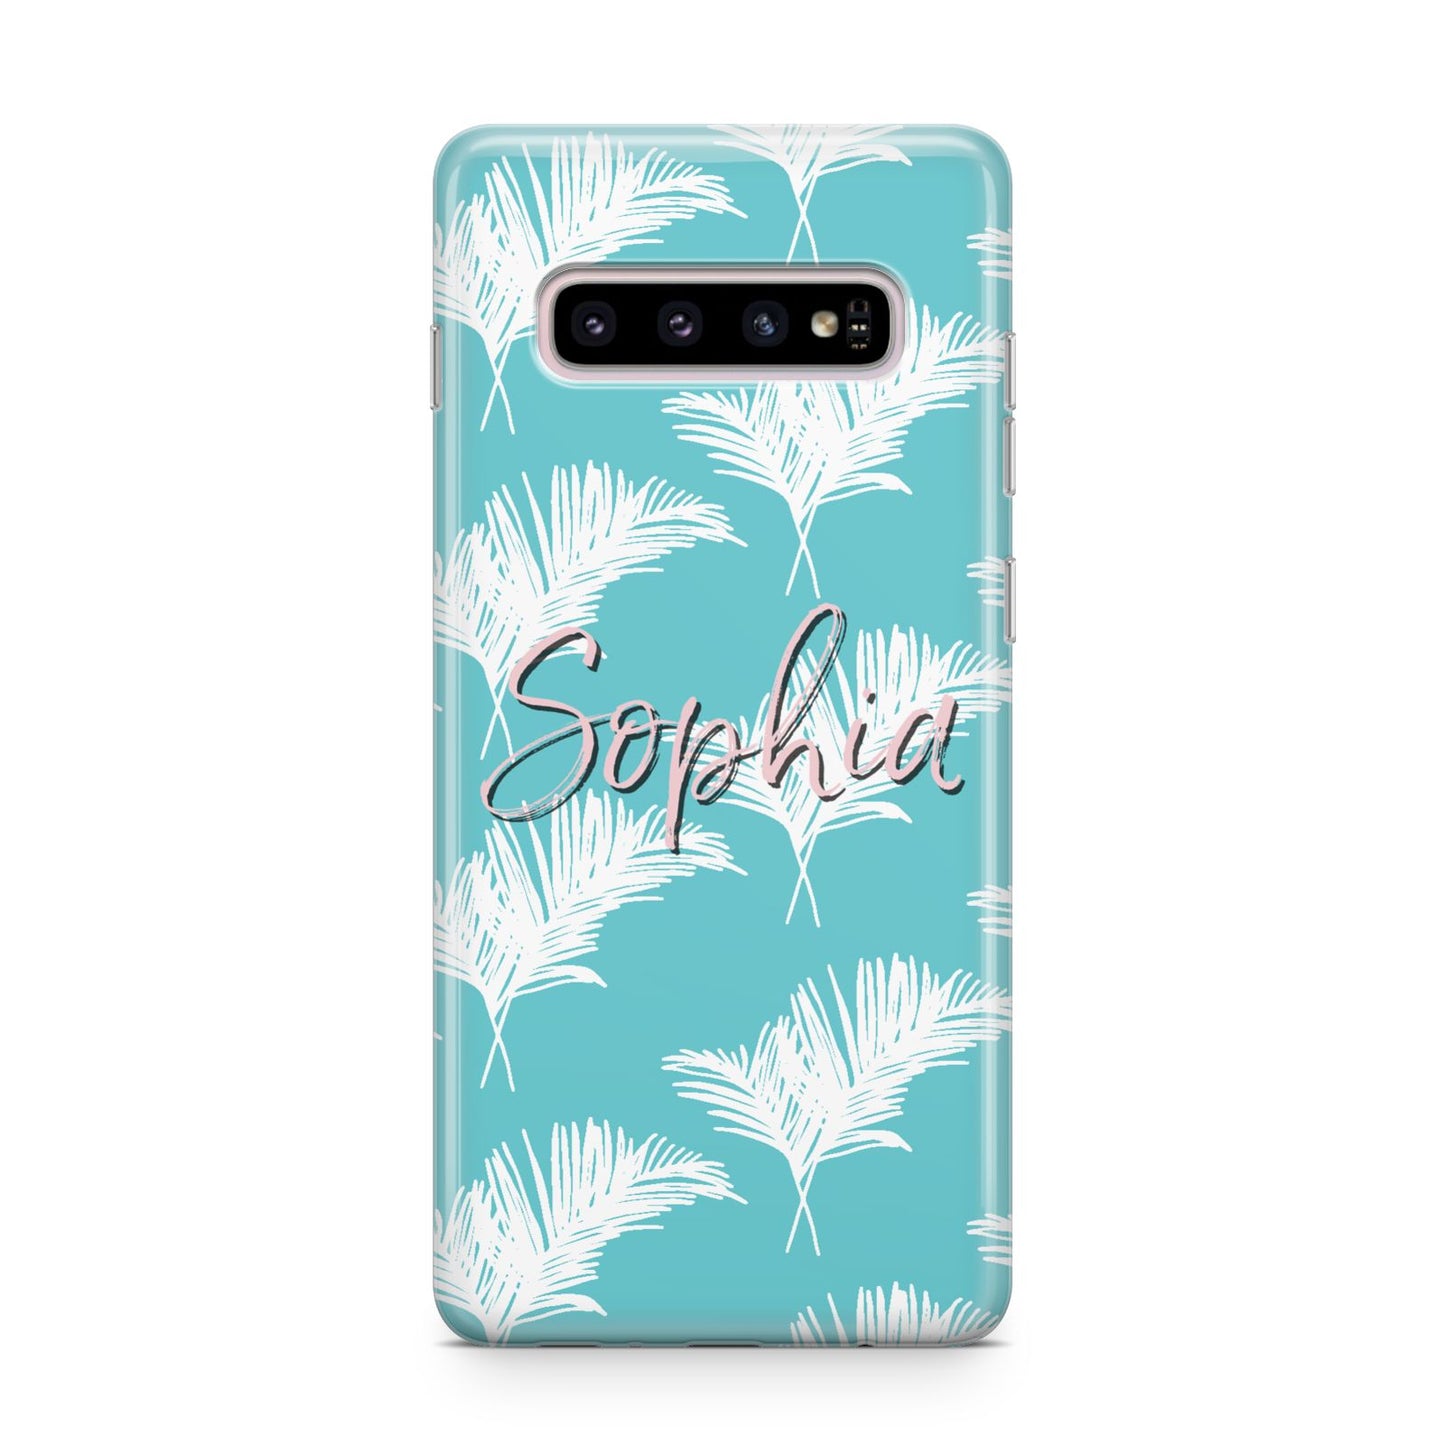 Personalised Blue White Tropical Foliage Samsung Galaxy S10 Plus Case